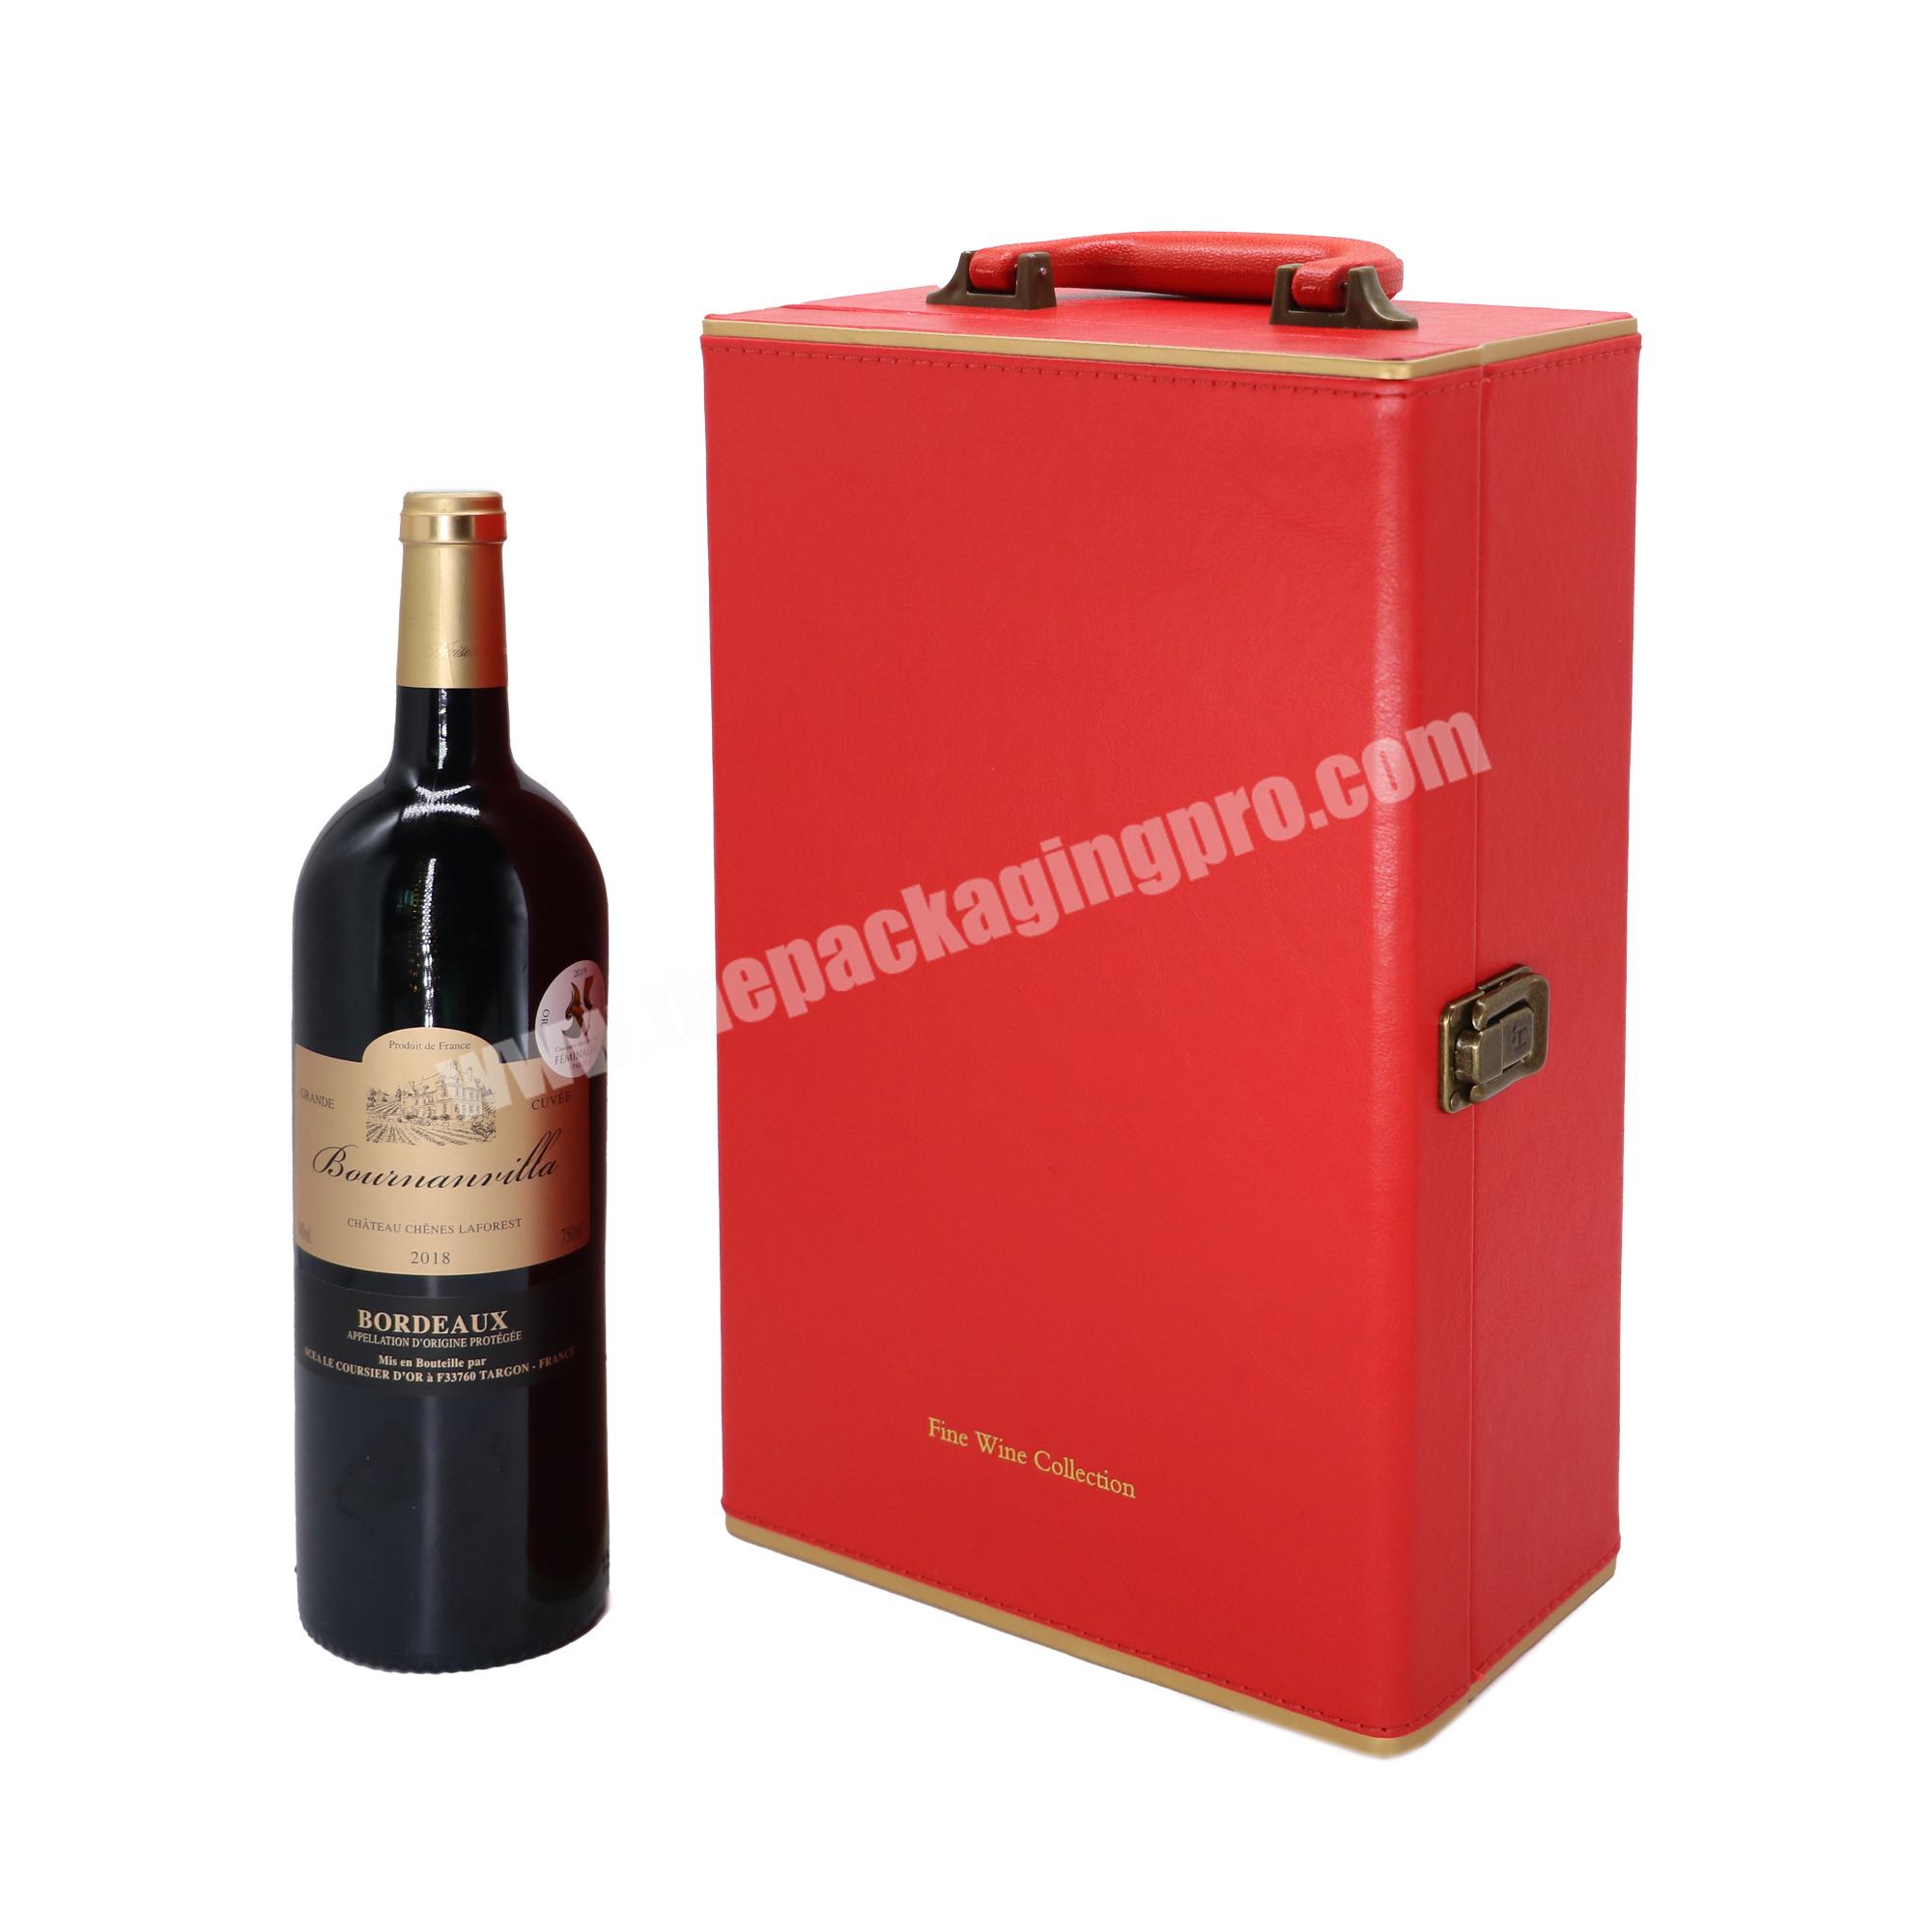 Wholesale luxury wine boxed wine package boxes for gift wine bottles with custom logo